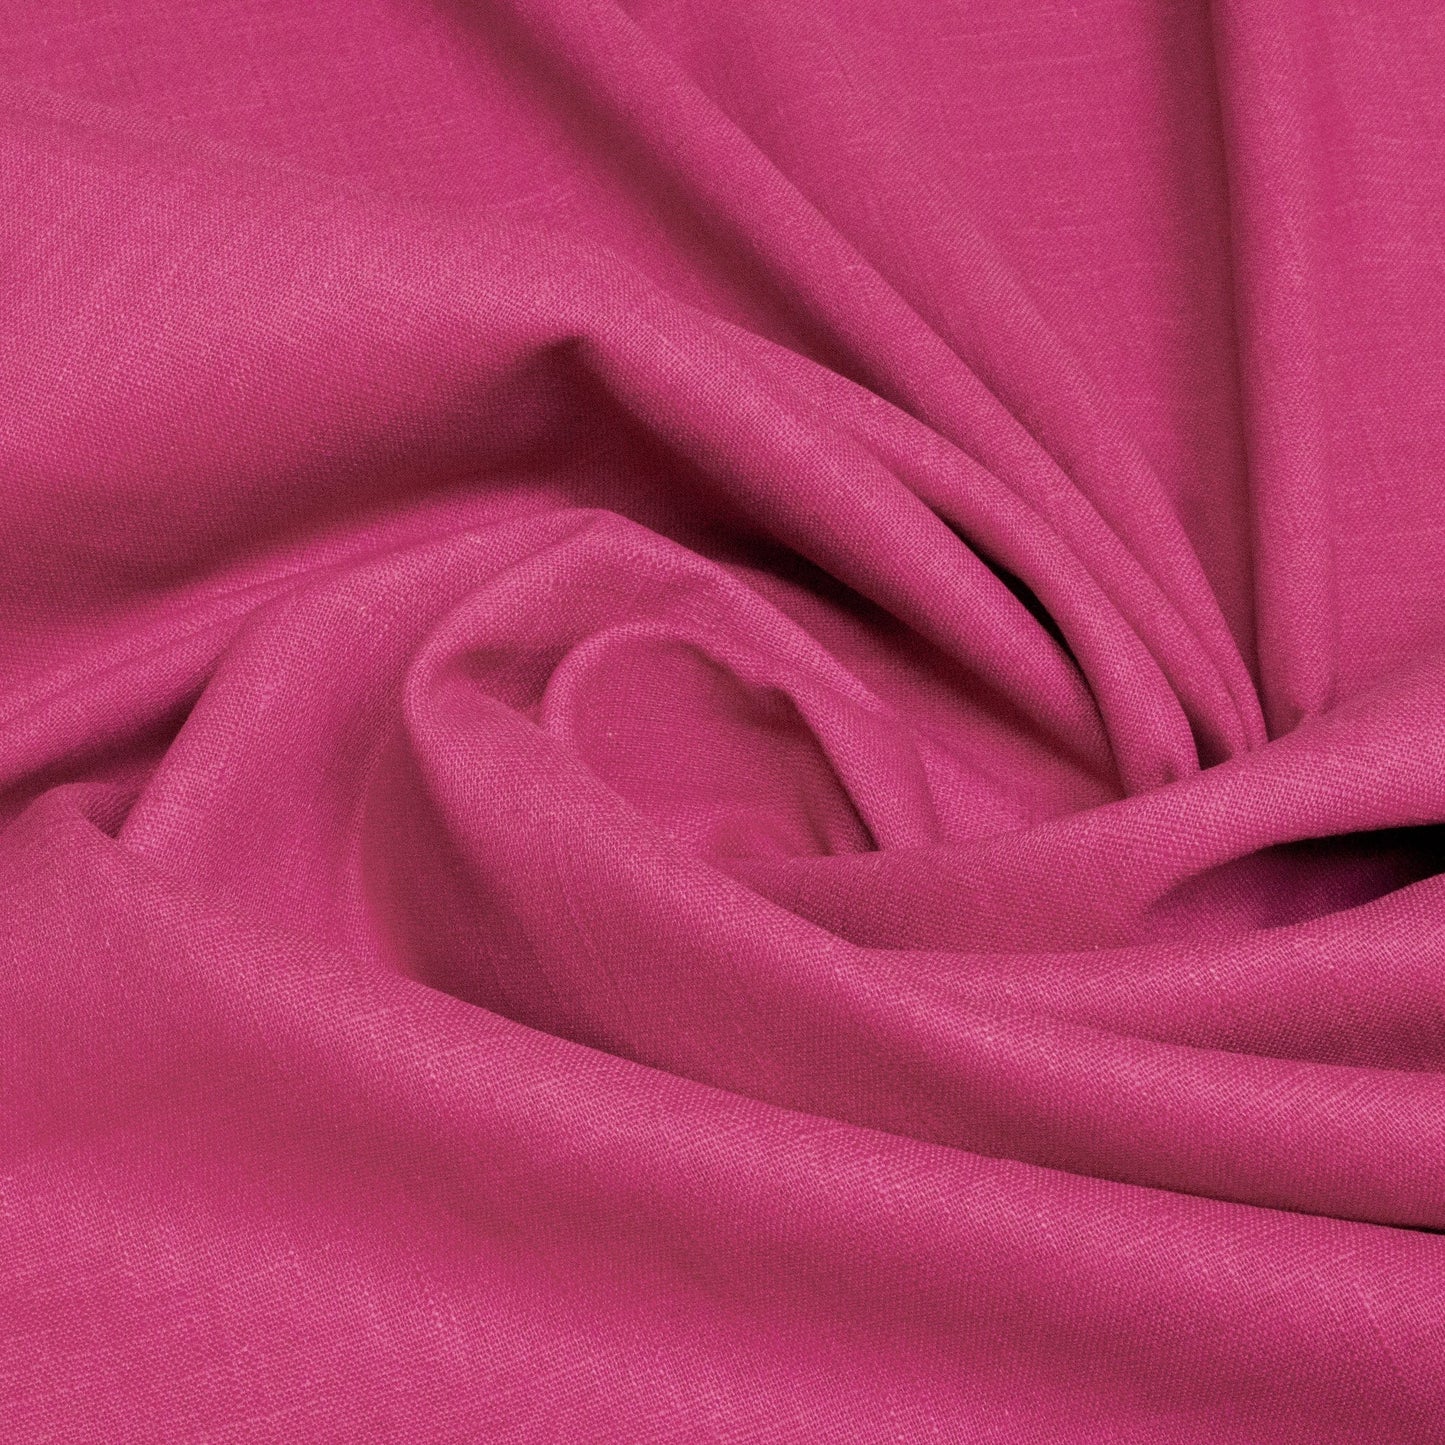 Washed Linen Chambray in Fuchsia